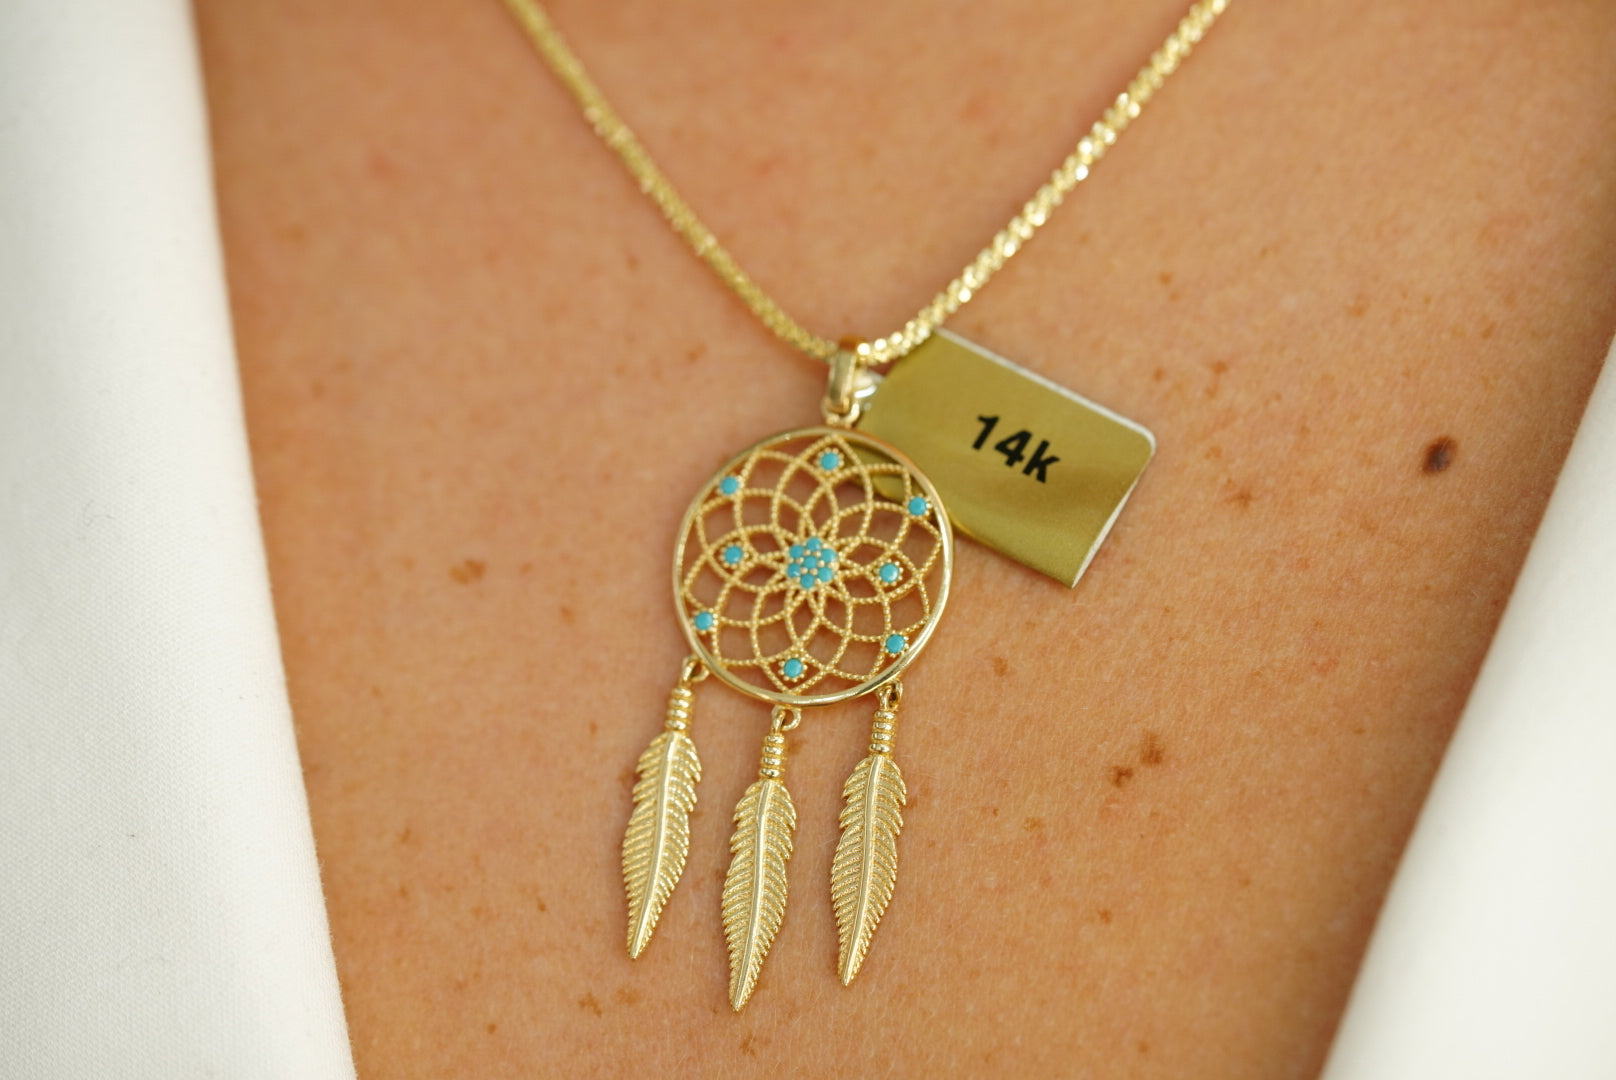 14k Dream Catcher Necklace and FREE Earring